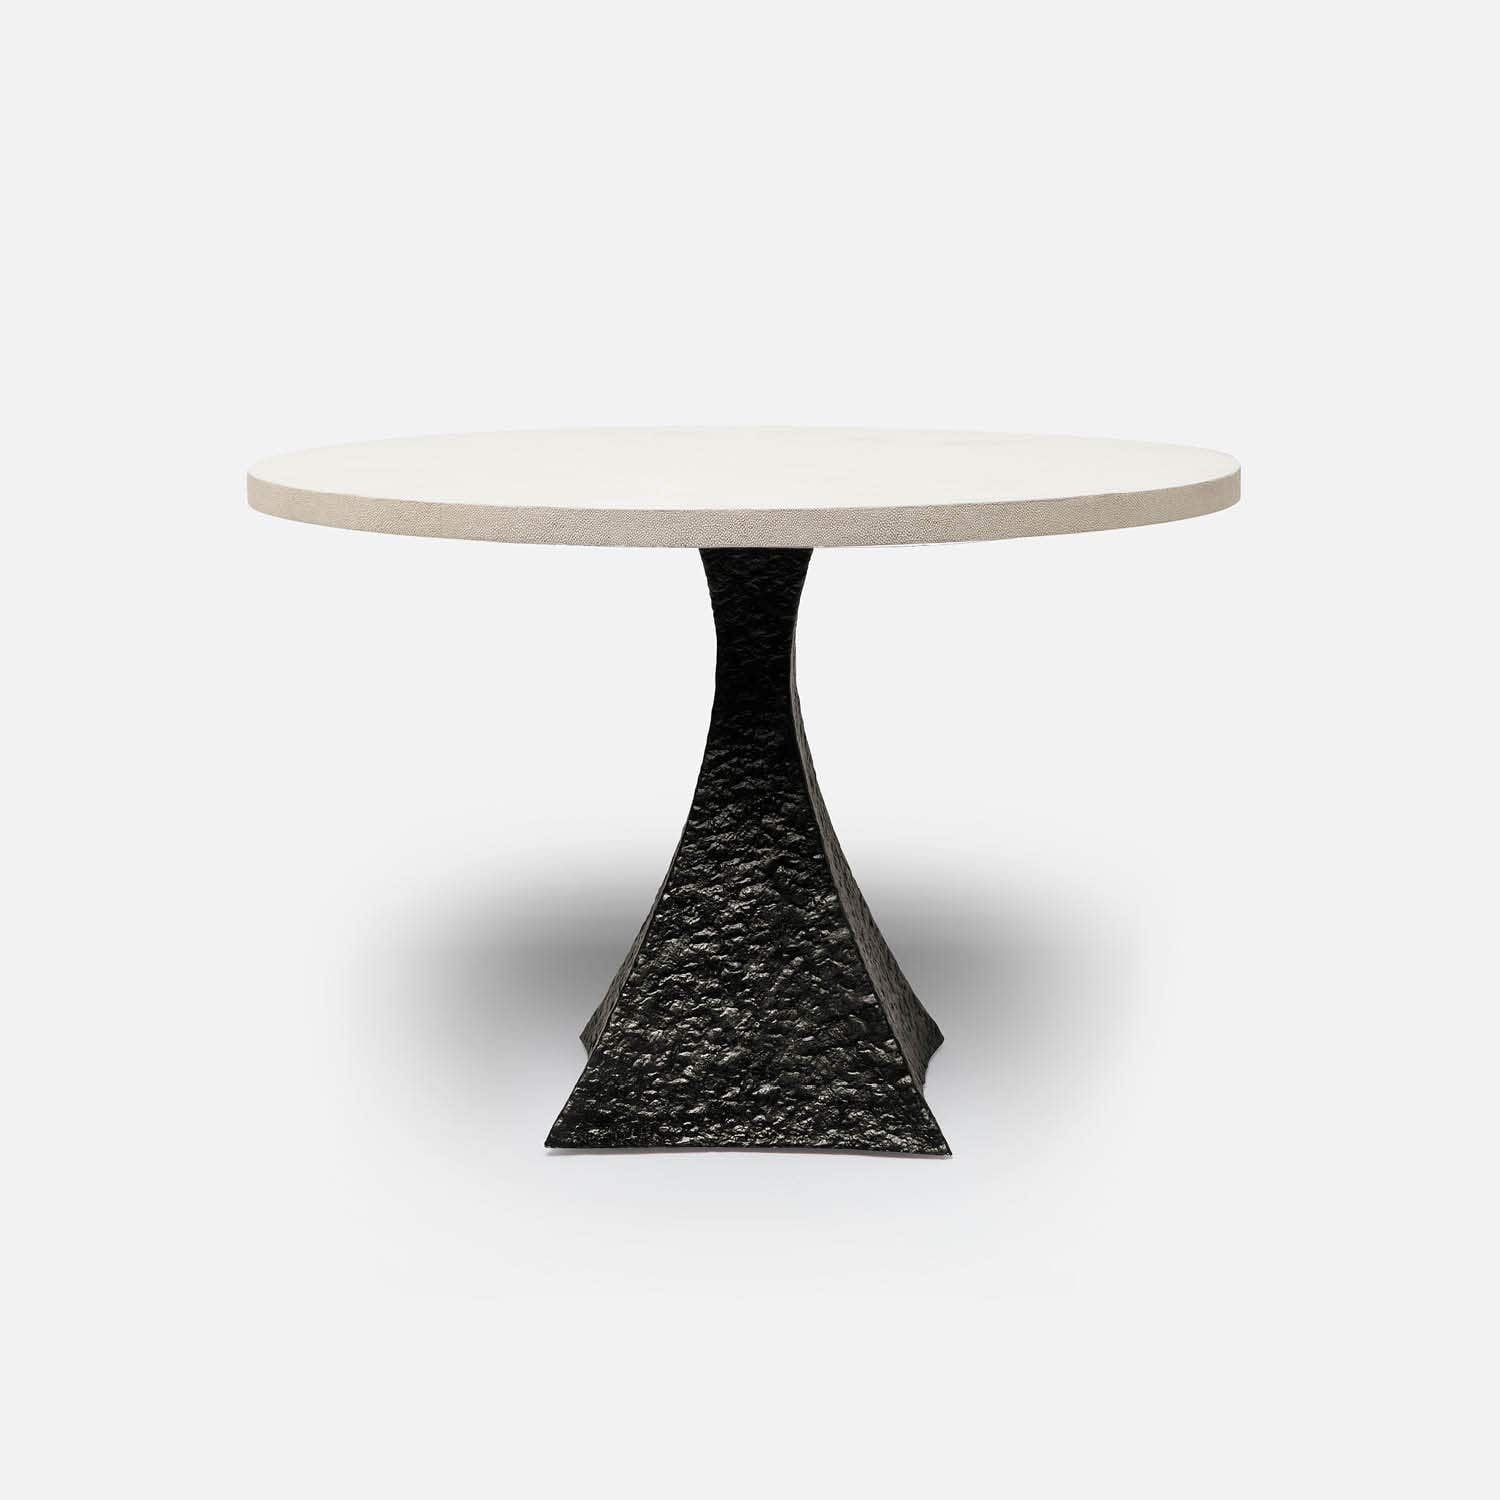 Made Goods Noor 54" x 30" Bumpy Black Iron Dinning Table With Round White Faux Belgian Linen Table Top